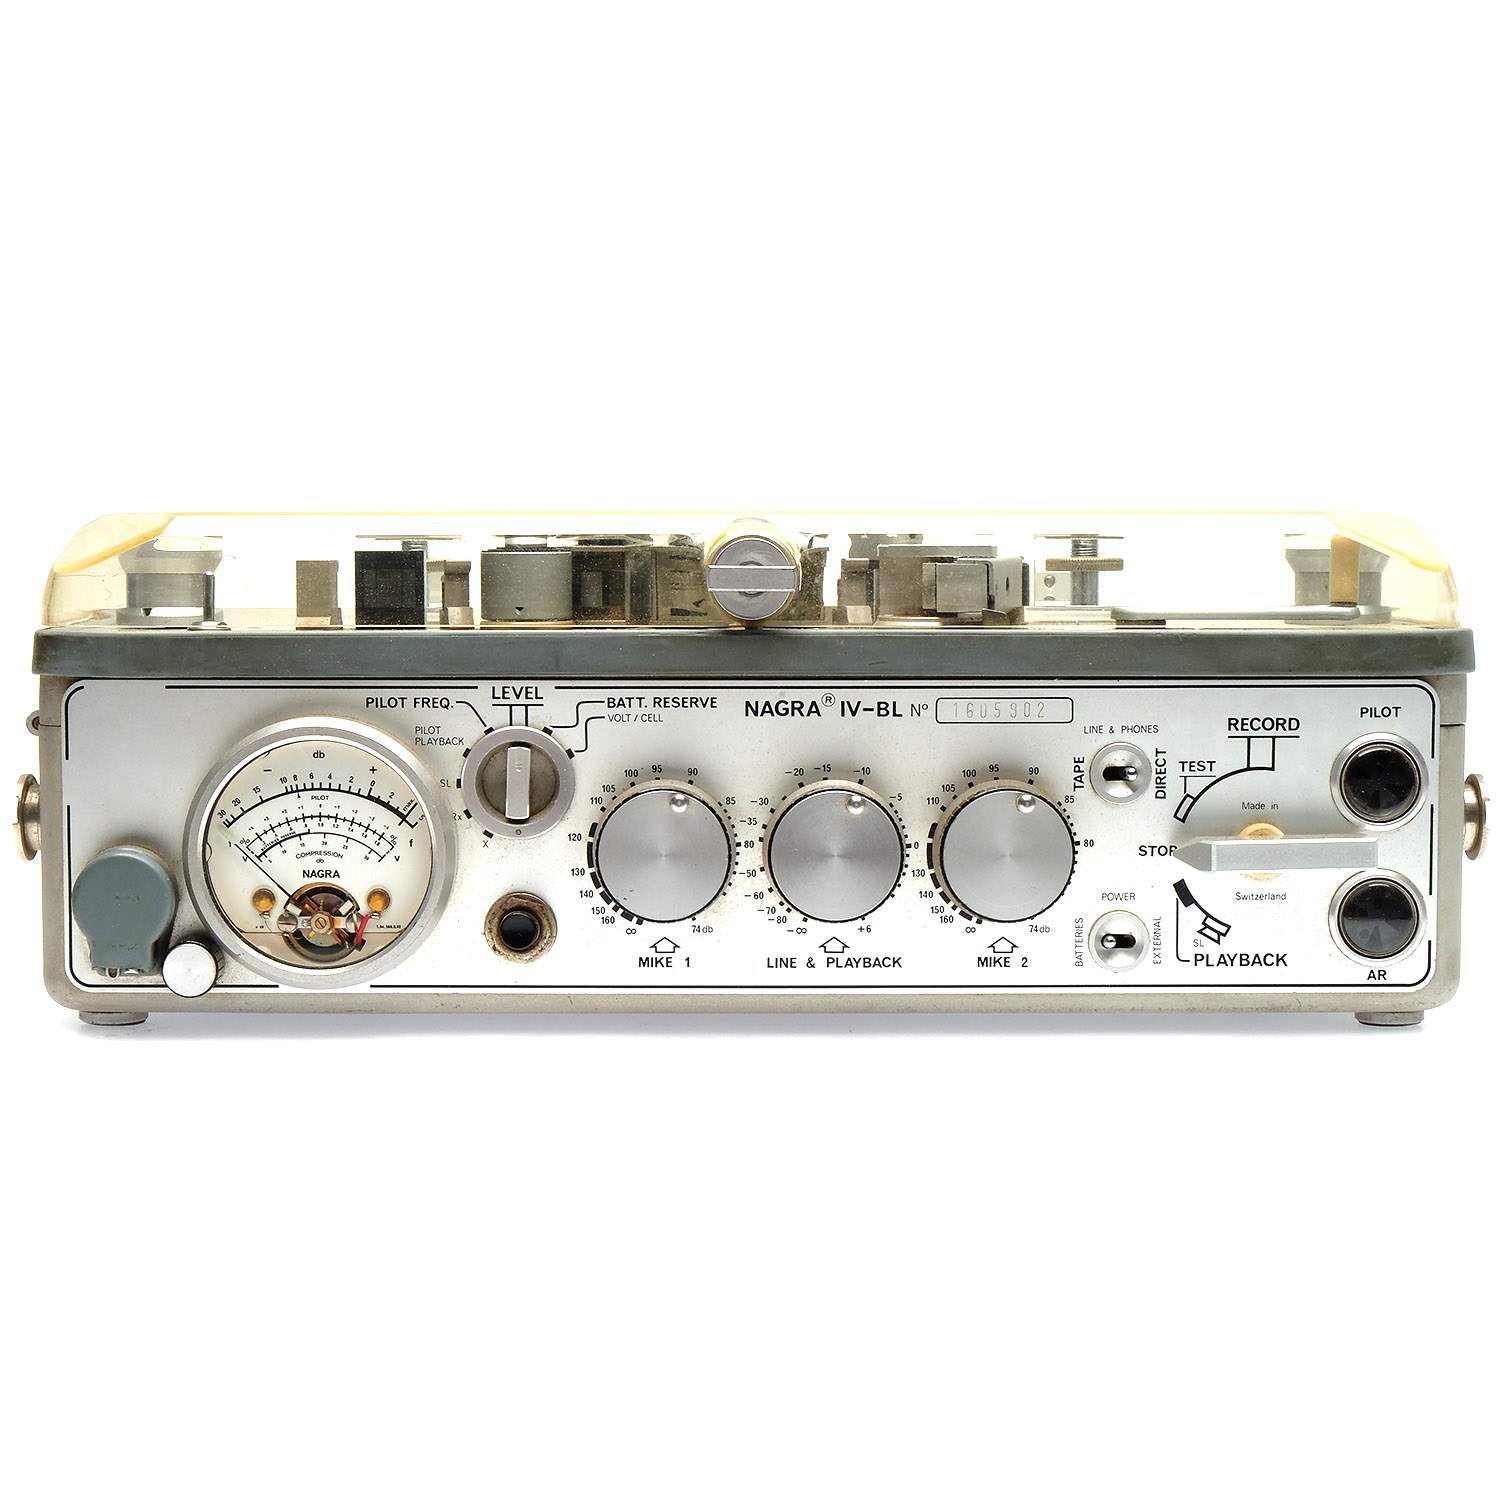 Nagra IV-BL, Case as-is 1605902